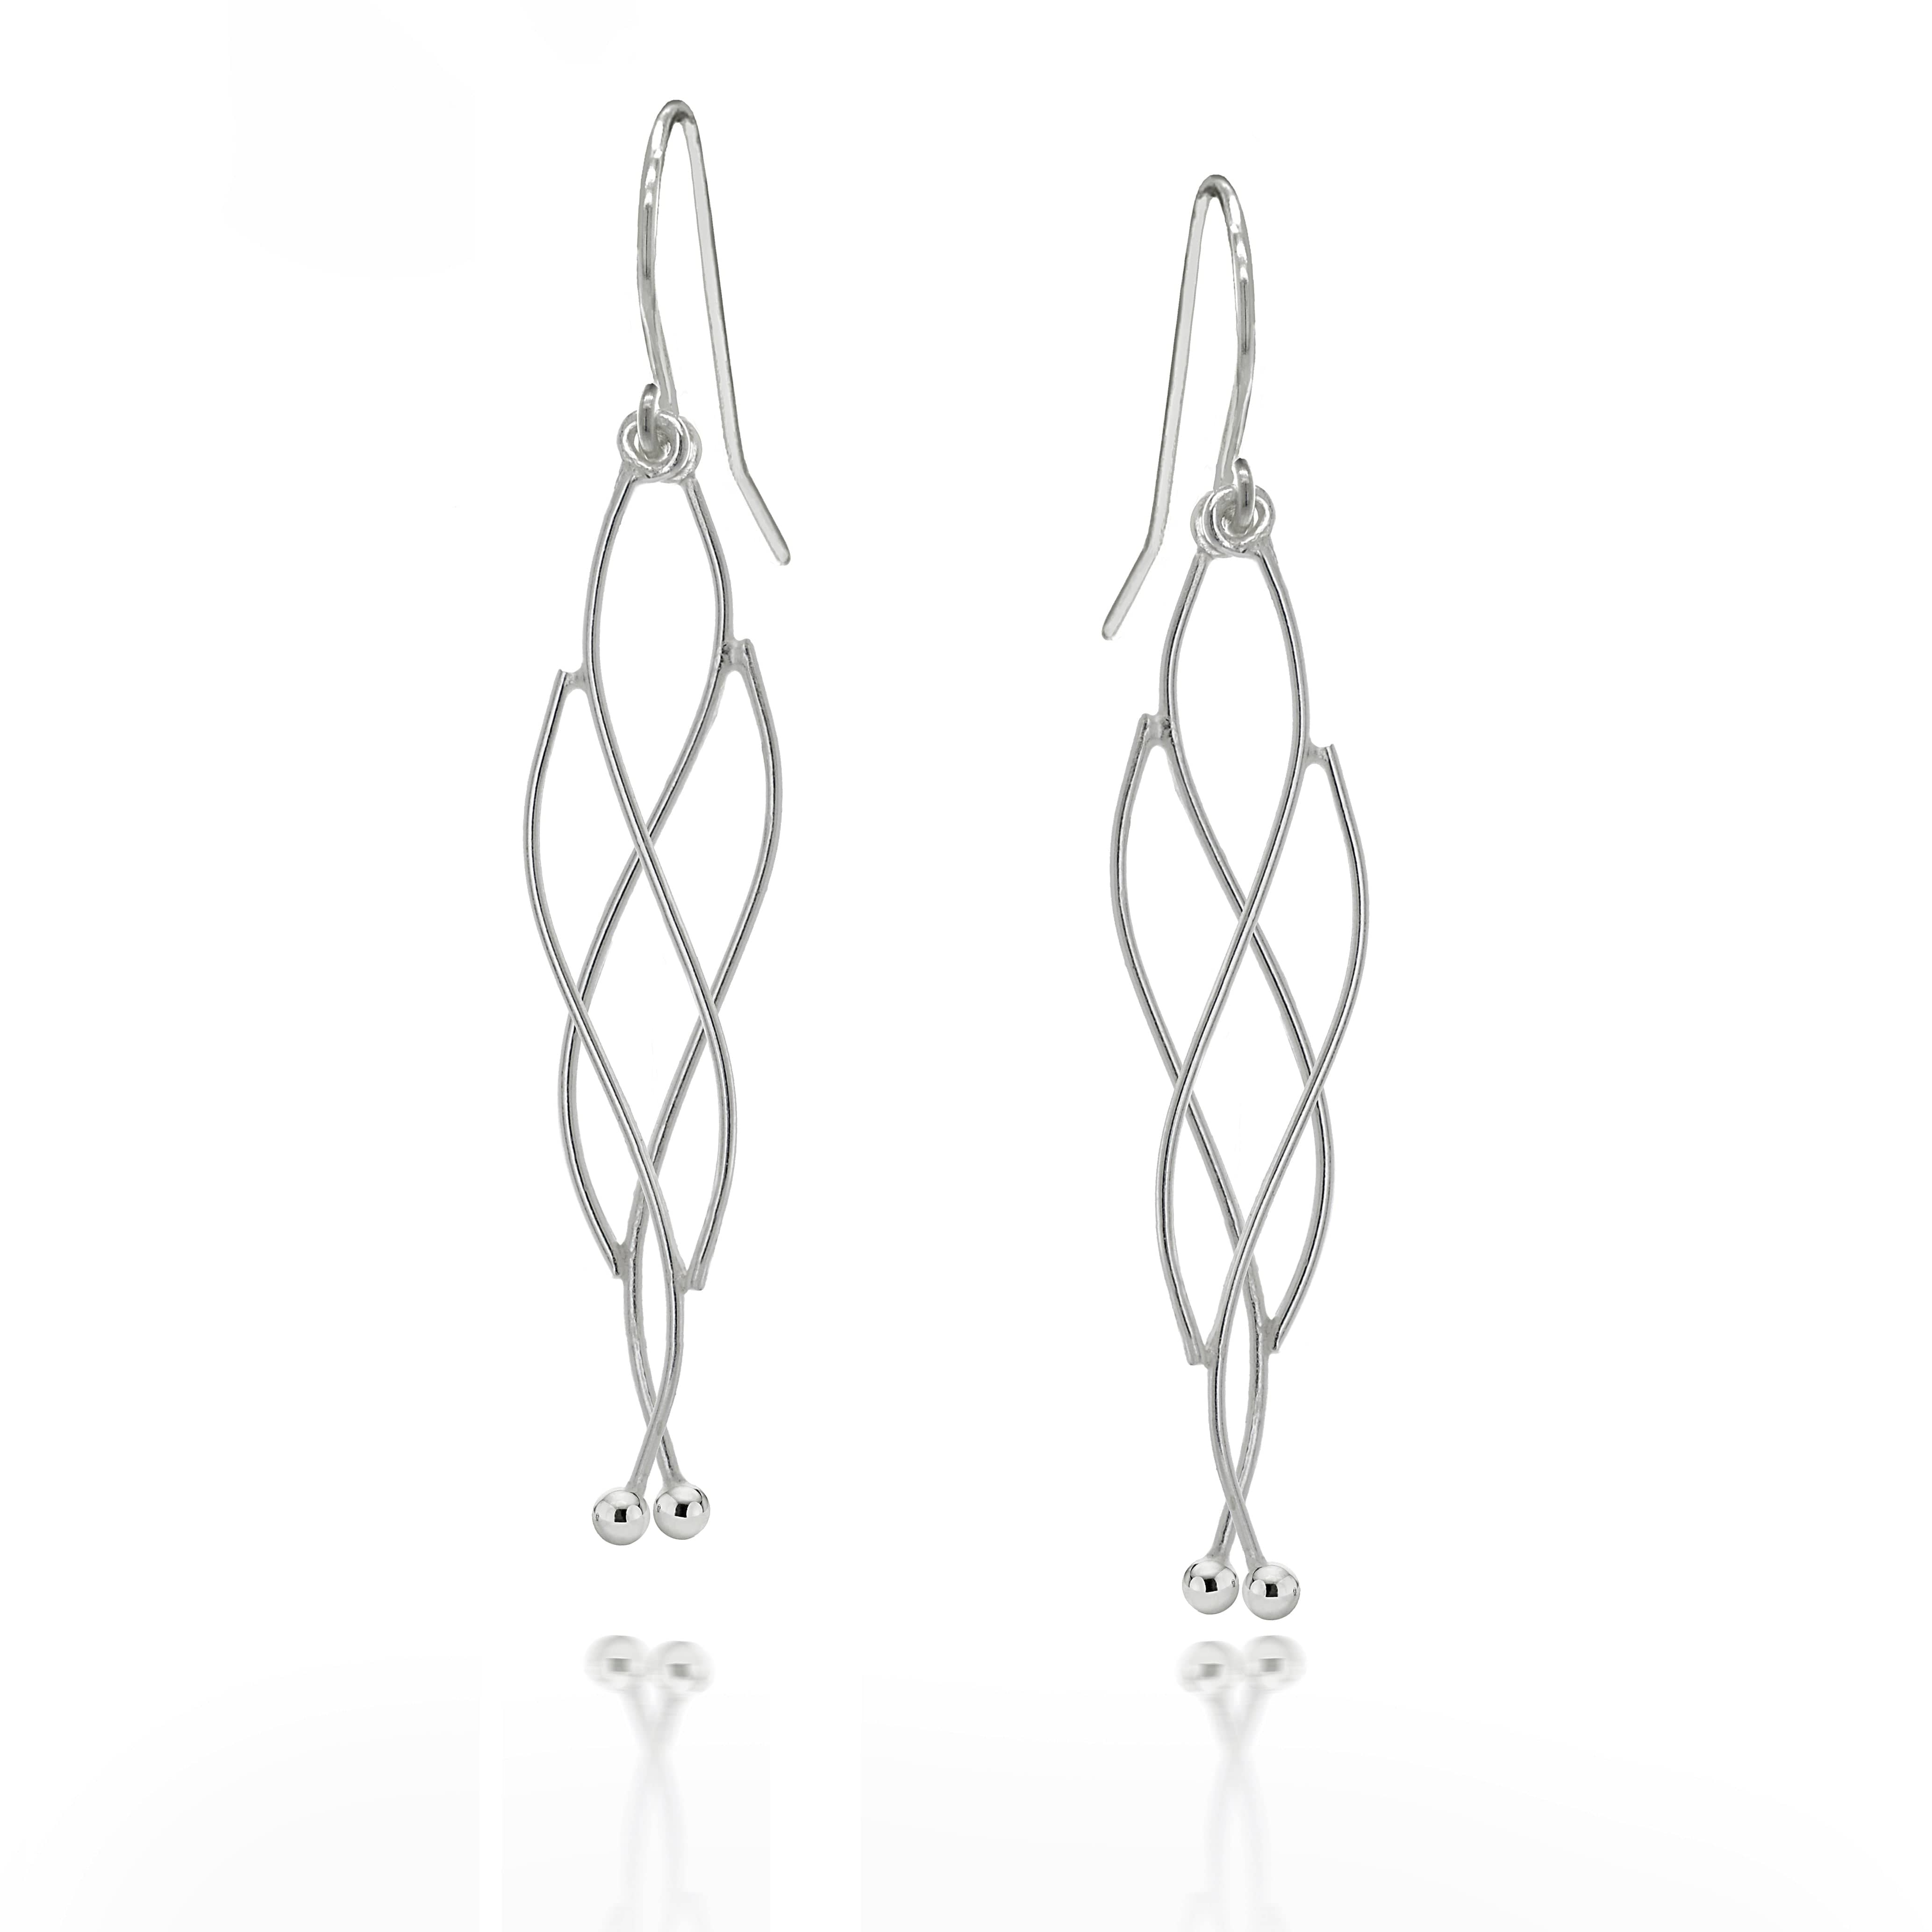 Lynora Silver Earring Sterling Silver / Clear Lynora Sterling Silver Twist Linear Drop Earrings